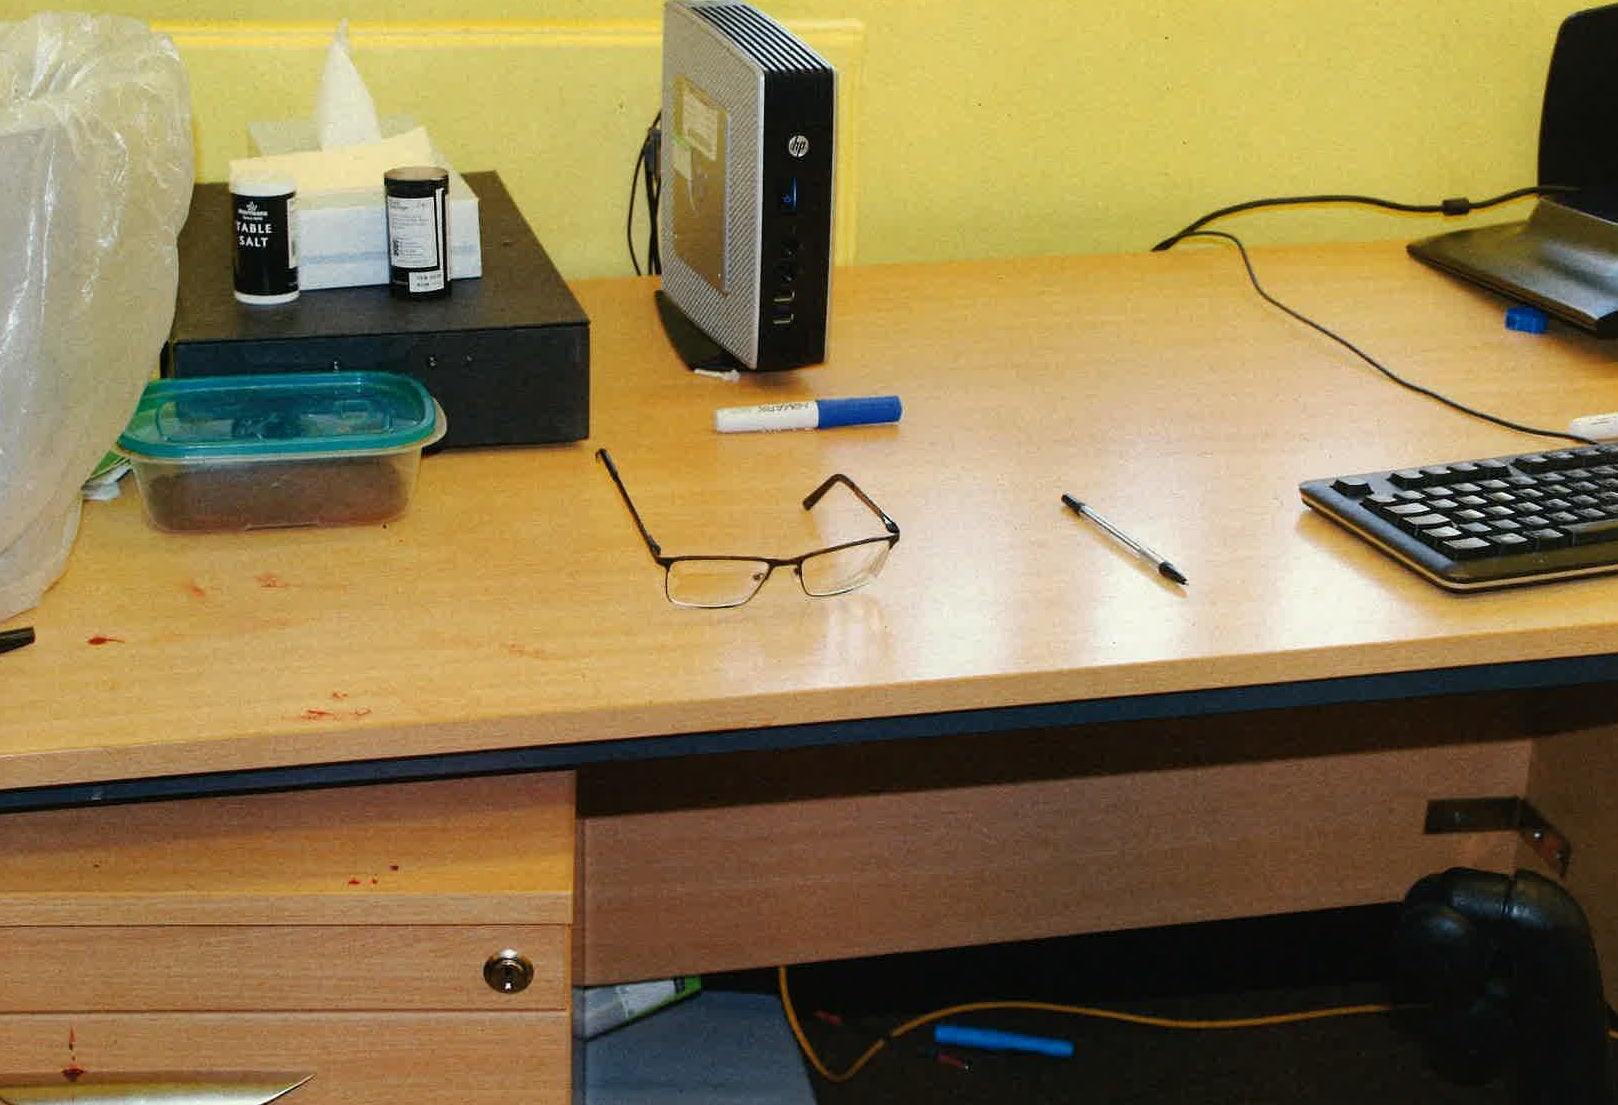 Blood on Paul Edwards’ desk at HMP Belmarsh following the attack